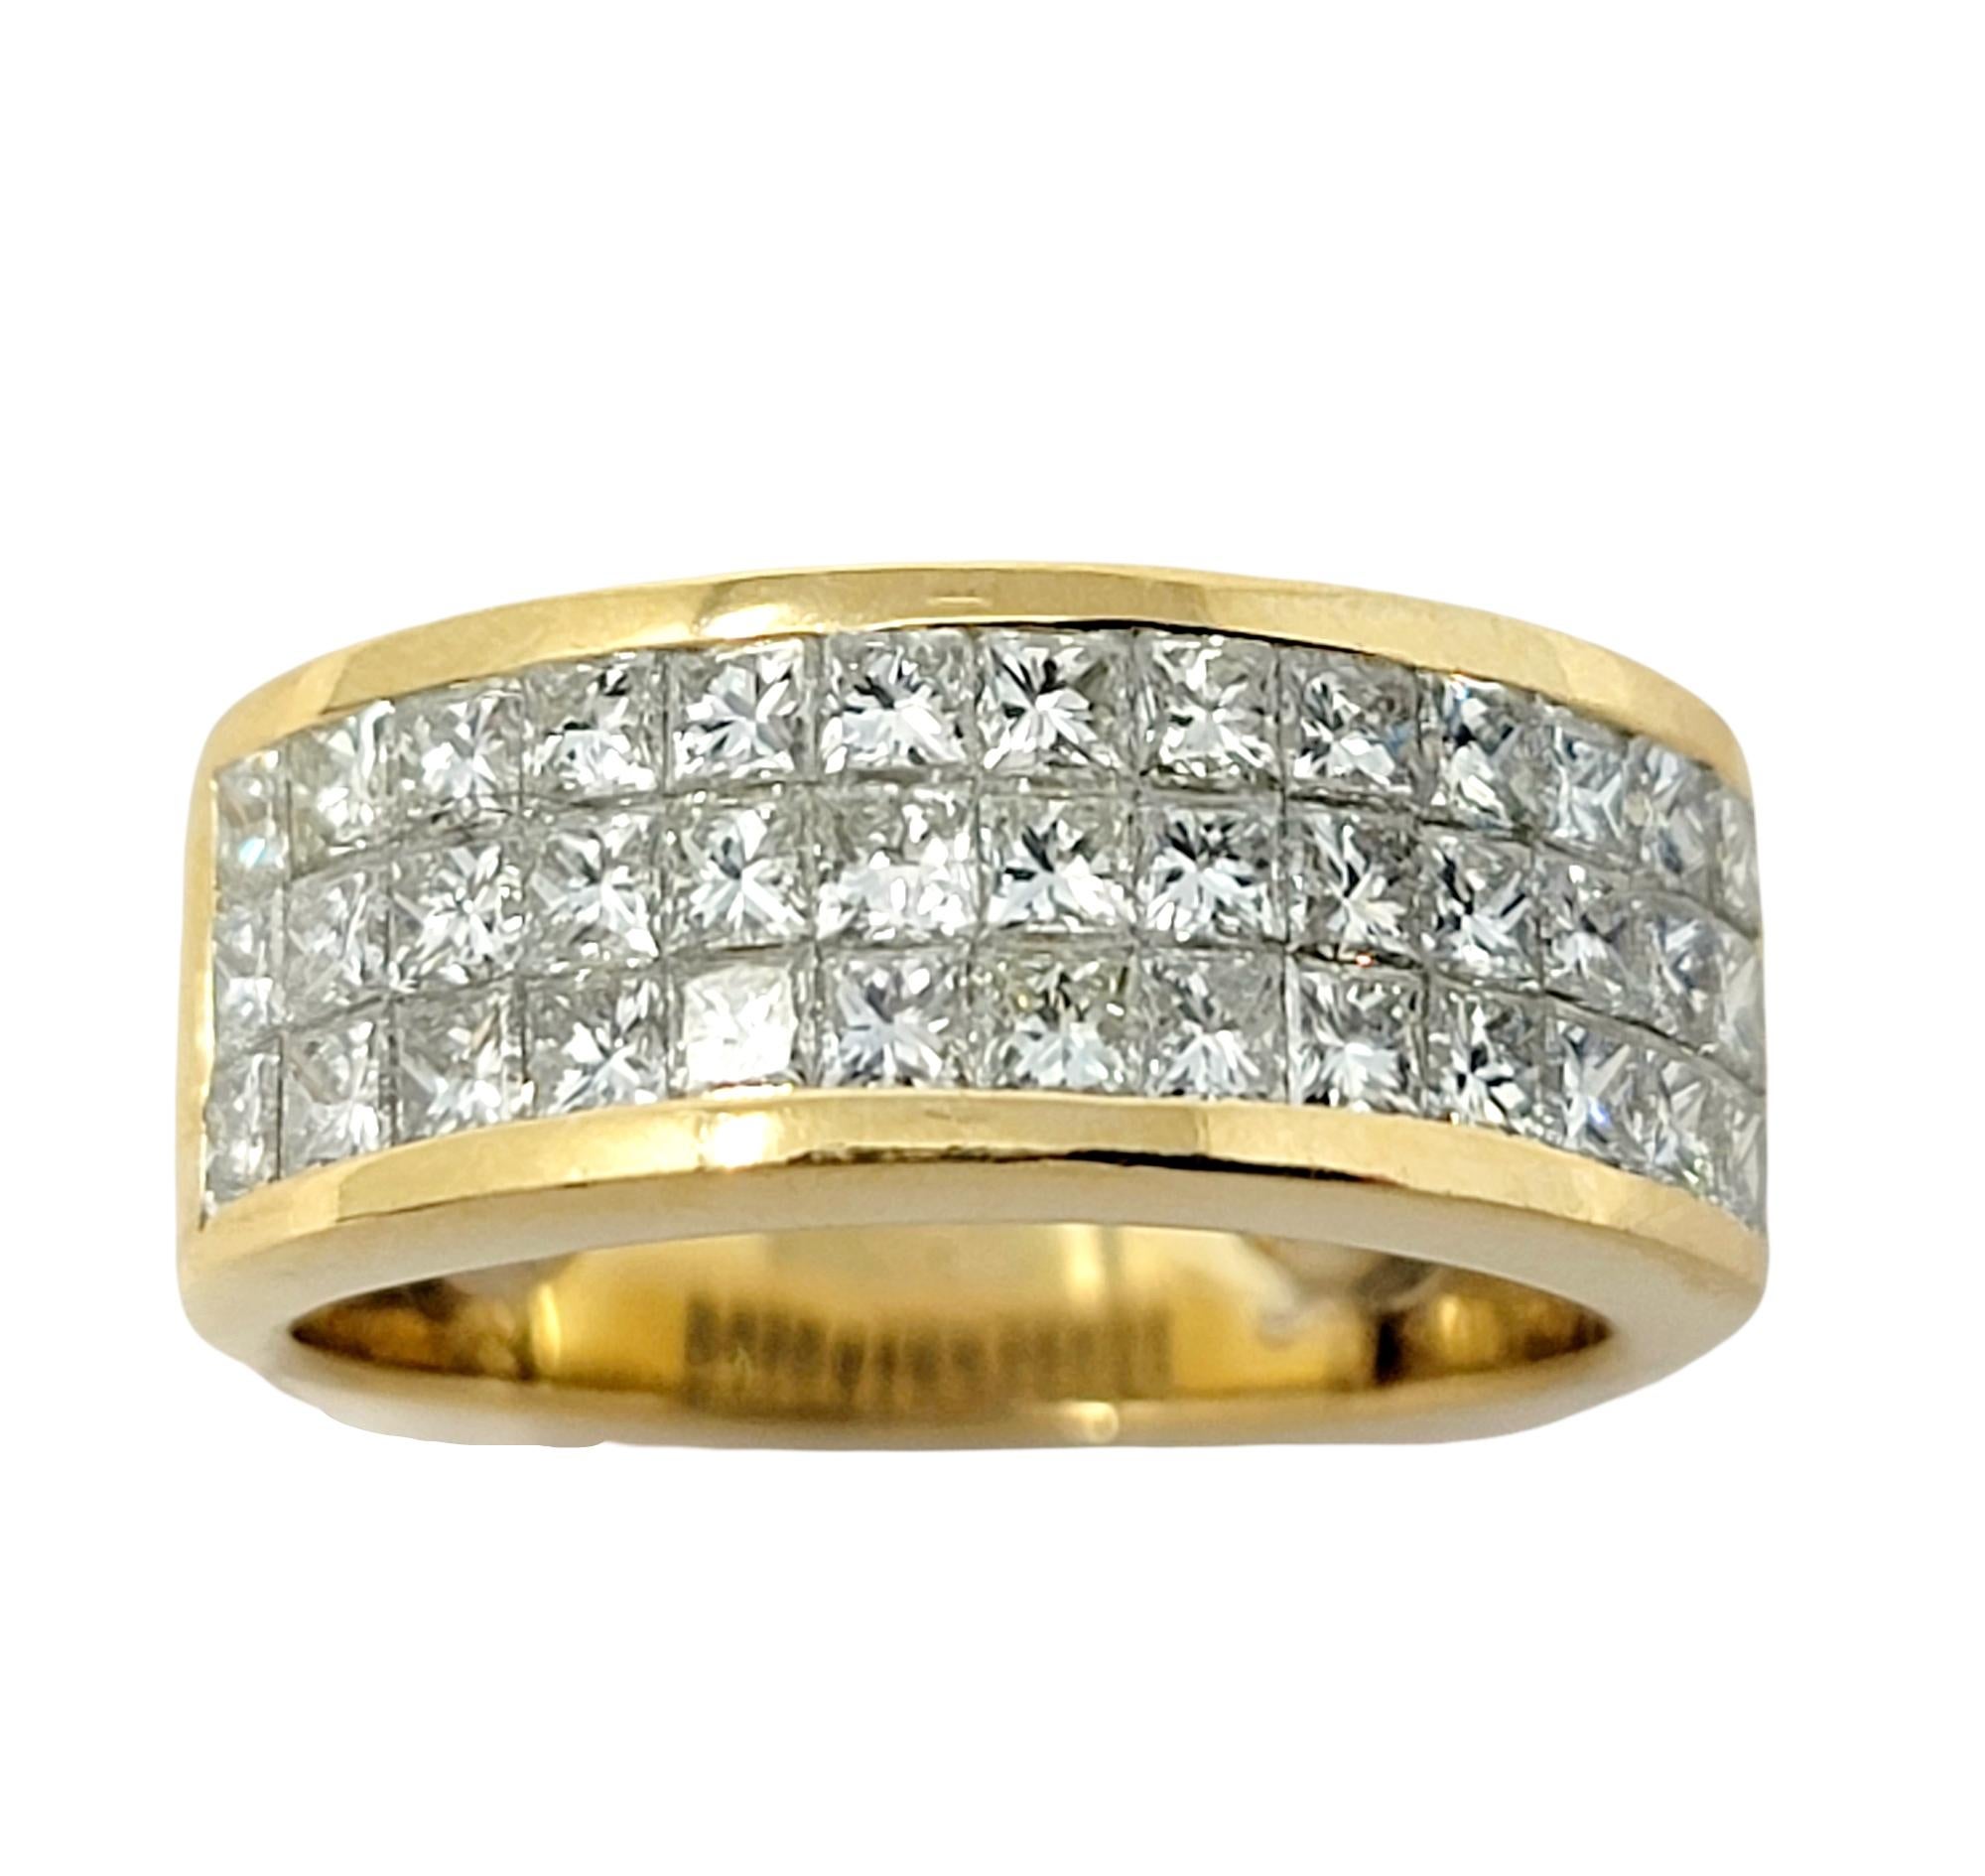 Ring size: 4.25

This dazzling diamond band ring wraps elegantly around the finger and fills it with sparkle. Featuring a sleek modern design, the invisible set natural stones catch the light from every angle, making it shimmer and shine